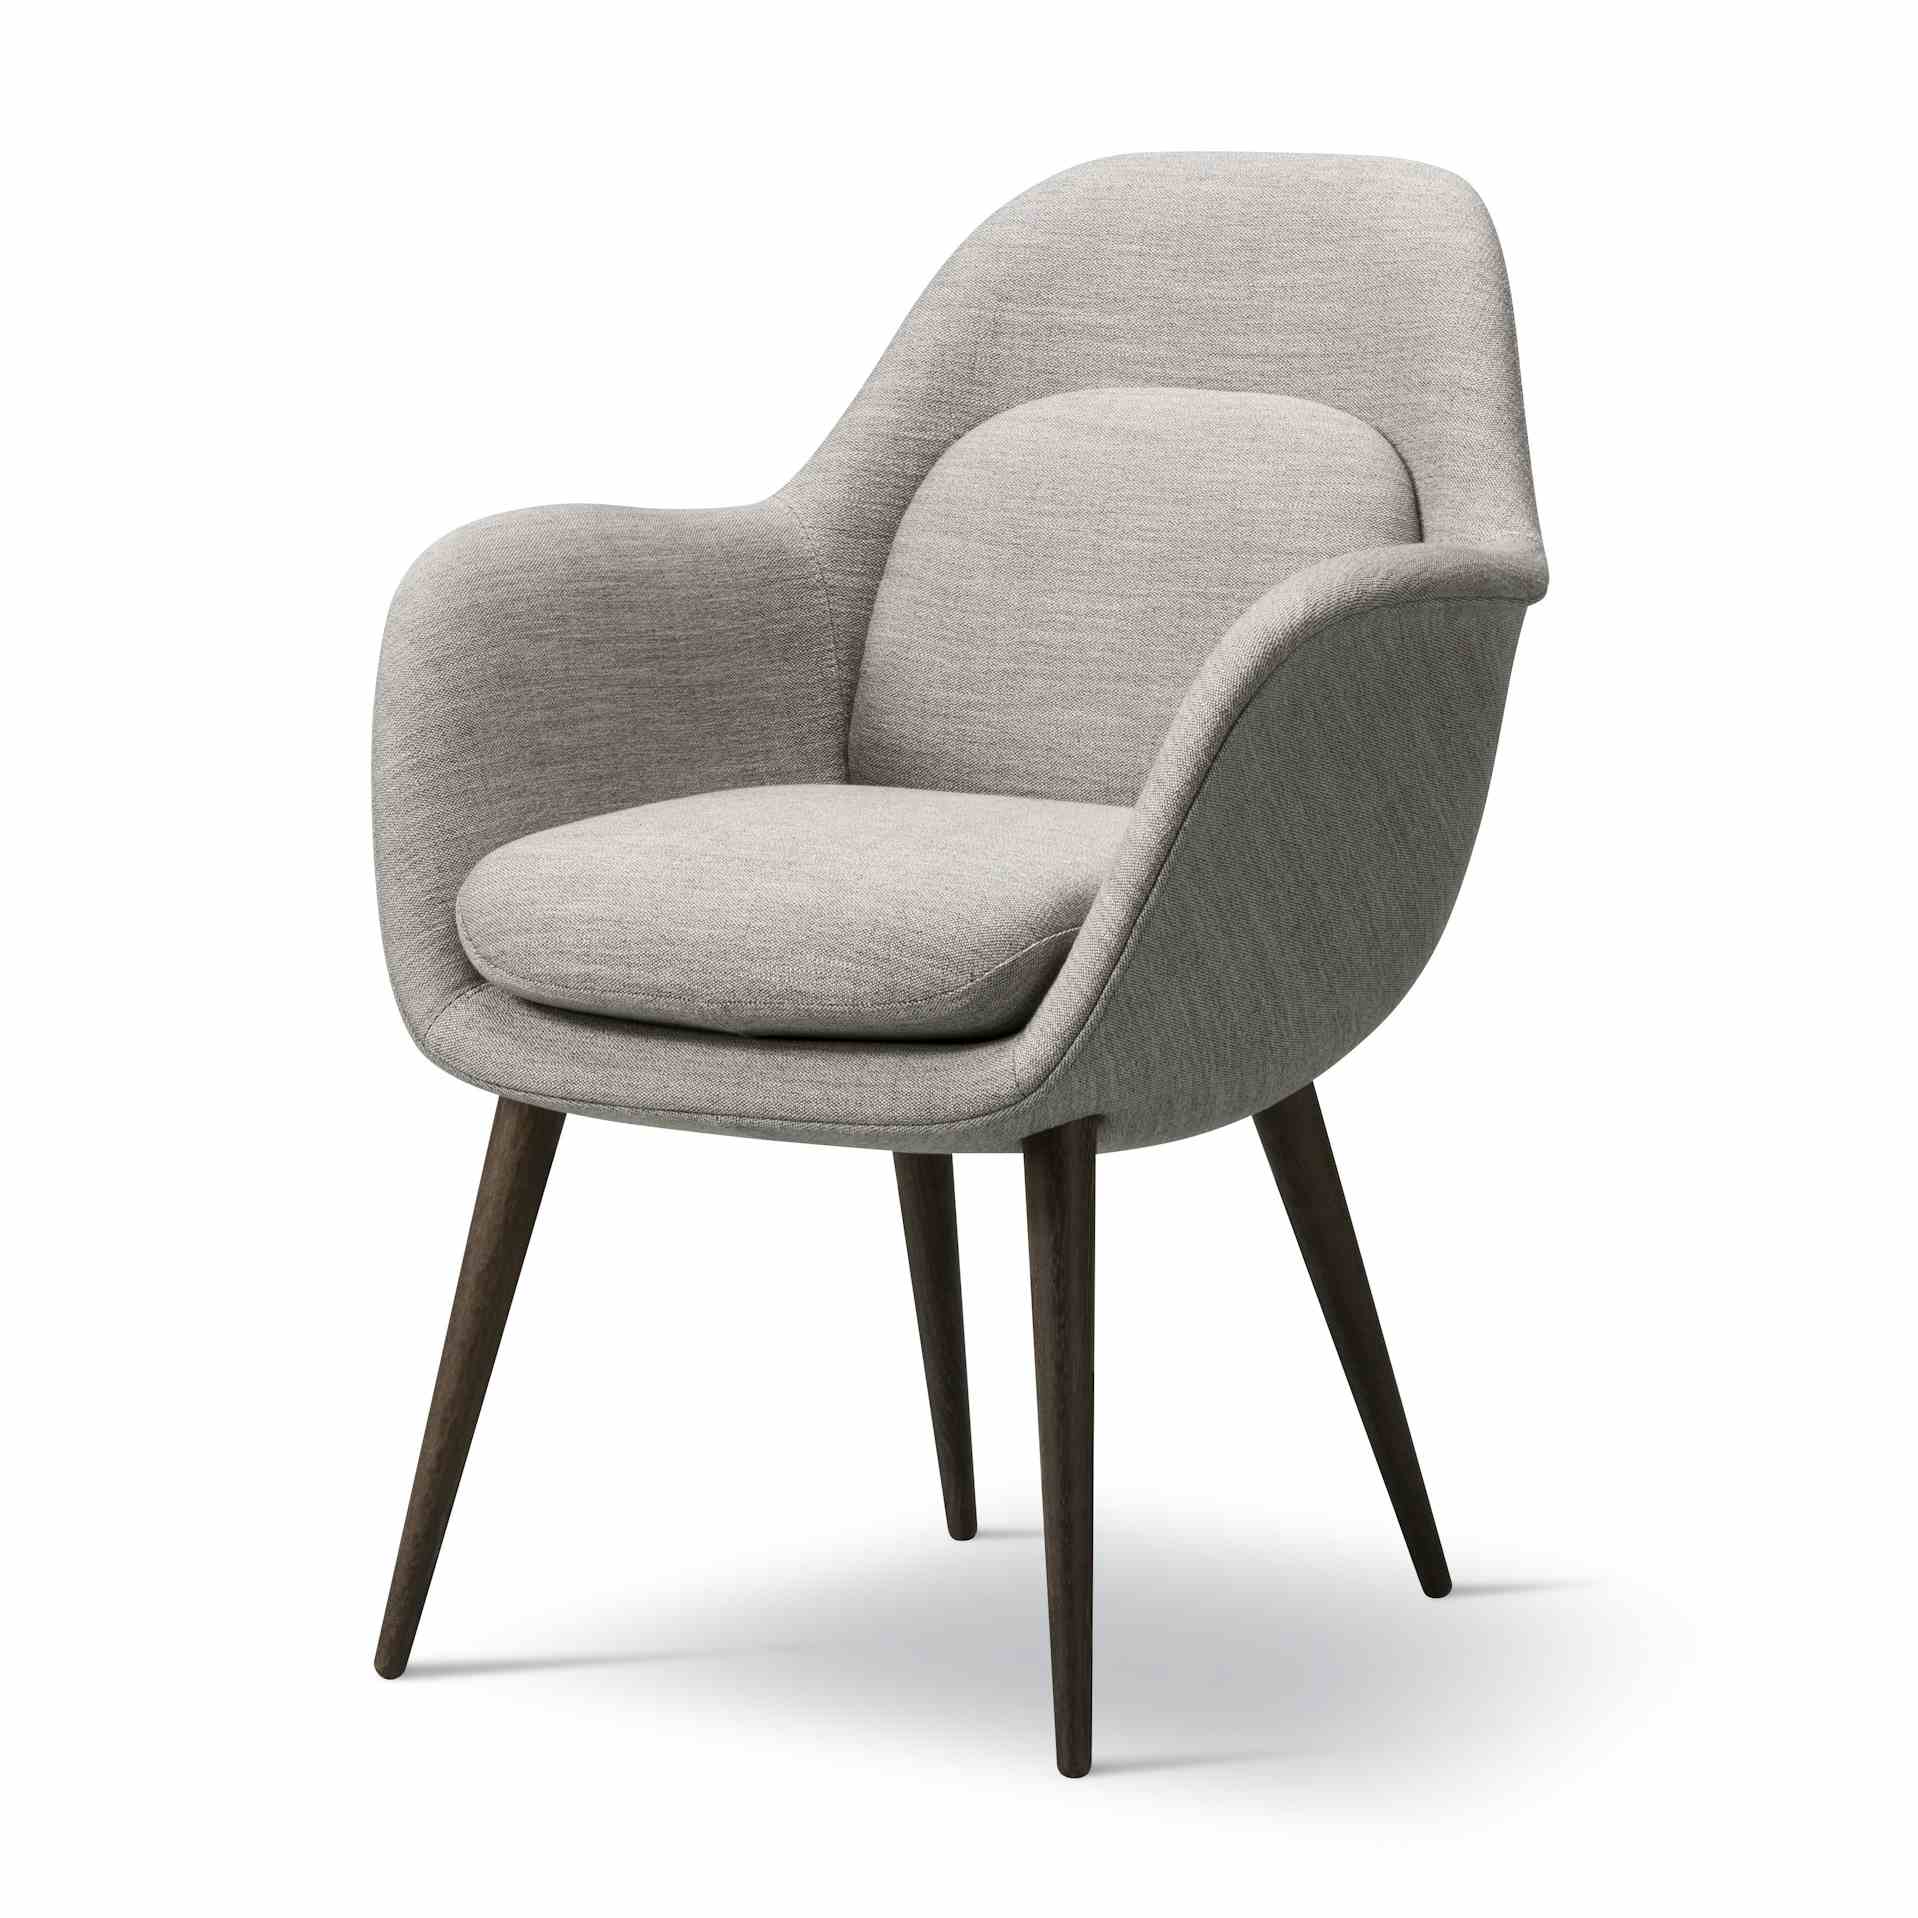 Fredericia-swoon-dining-chair-34-haute-living